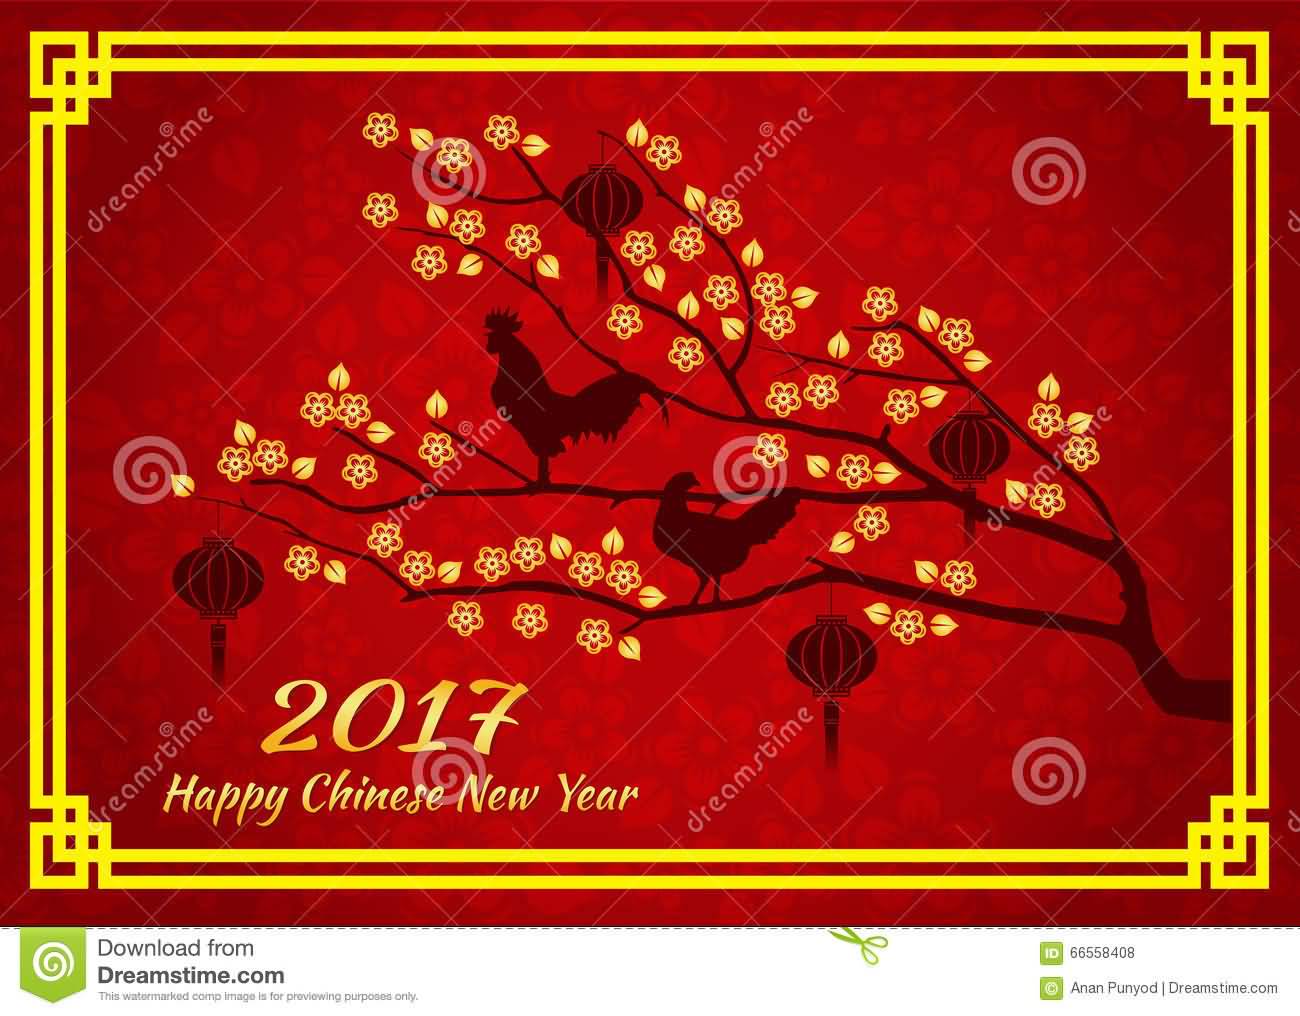 2017 Happy Chinese New Year Roosters On Tree Branches